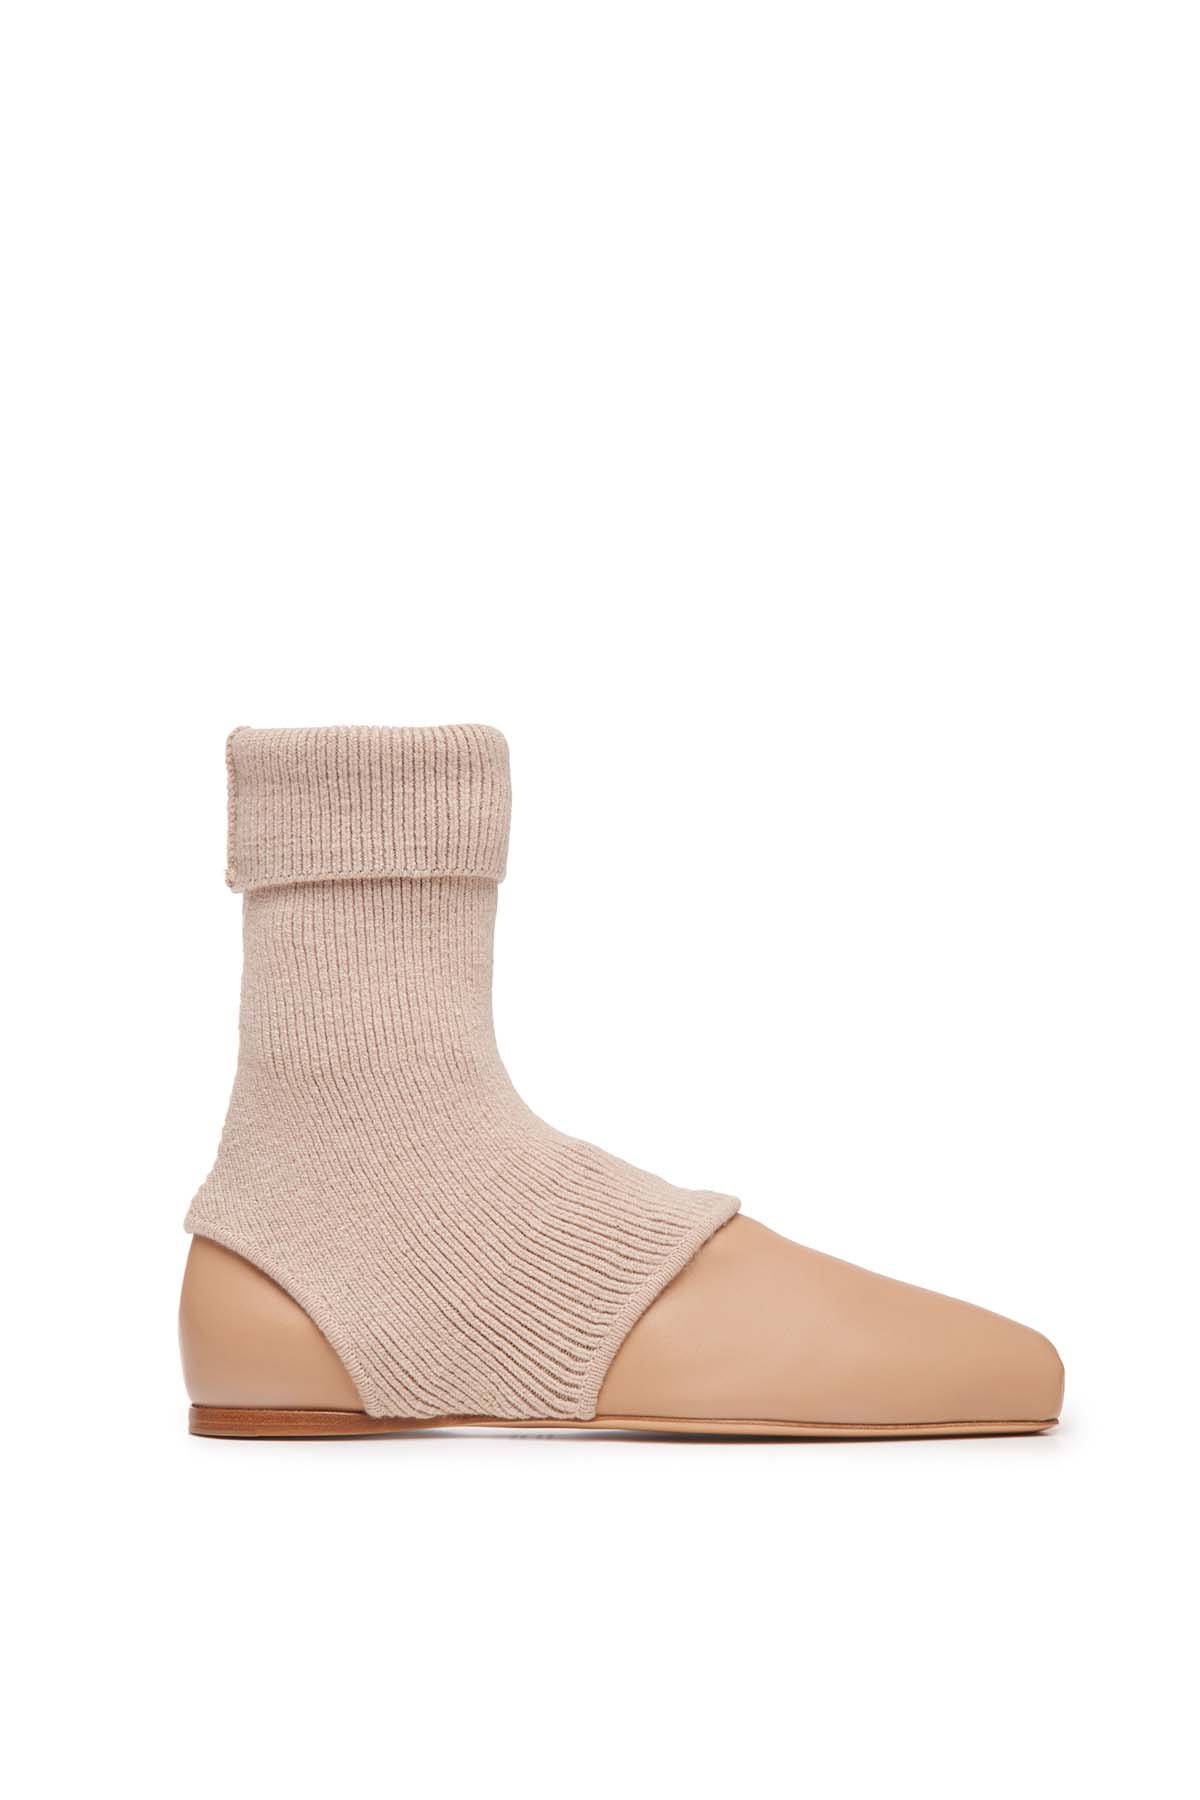 Mishka Ankle Sock Boot in Dark Camel Cashmere Leather